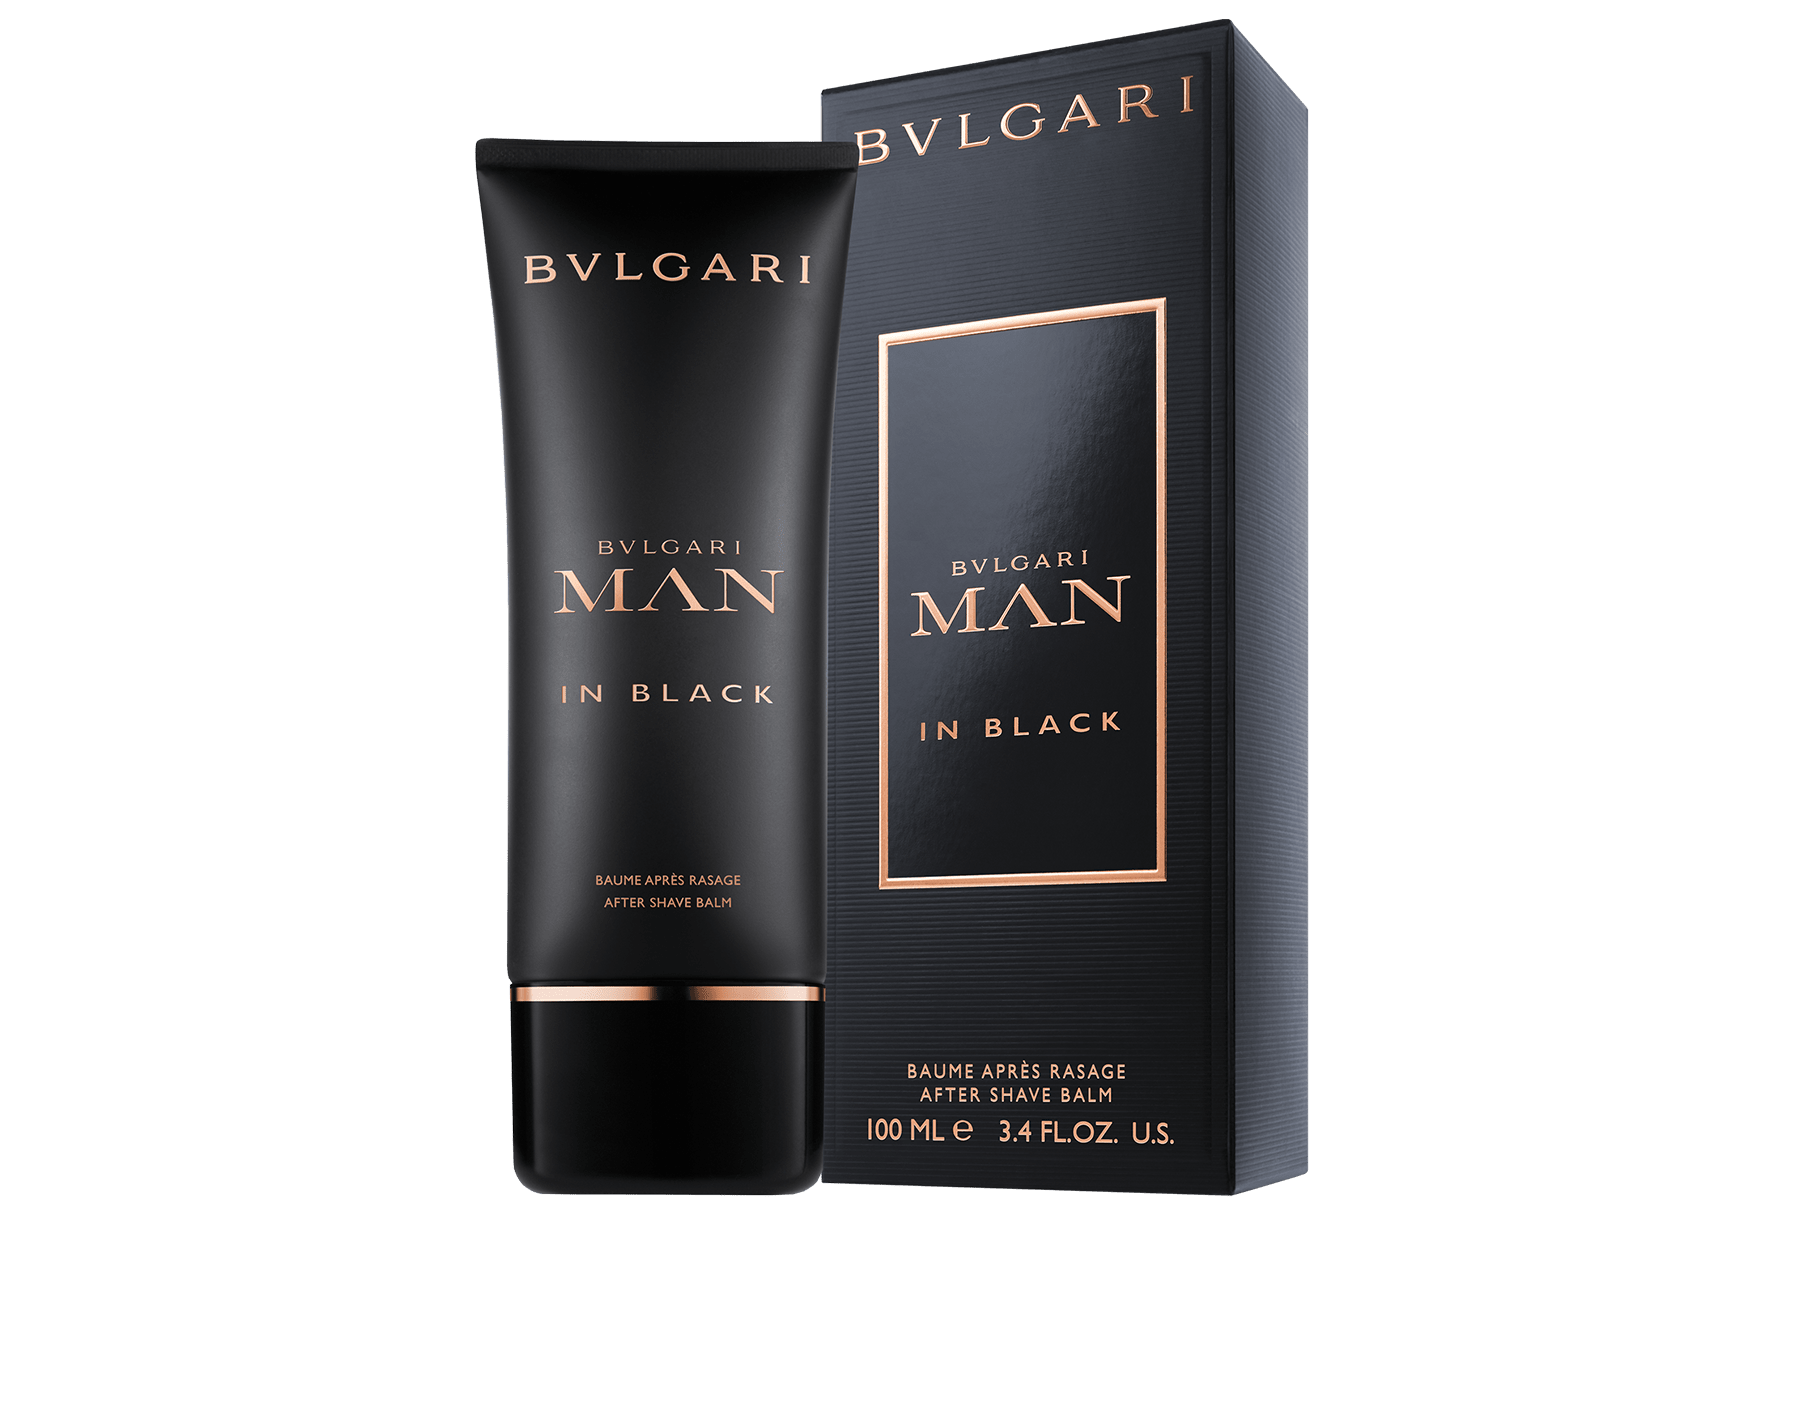 bvlgari after shave balm